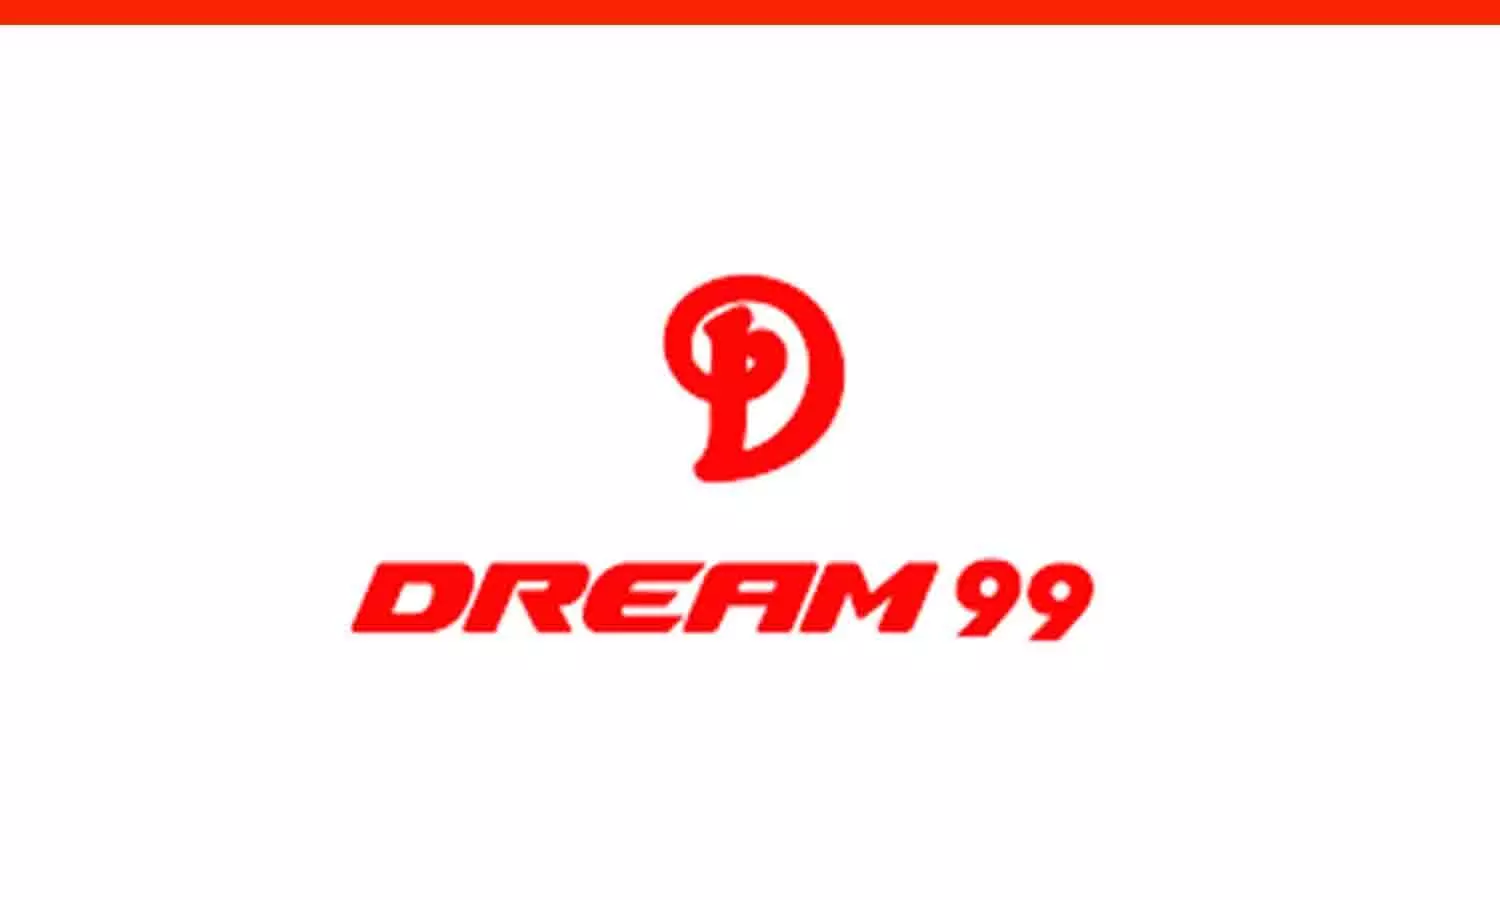 Dream99 App Download & Play Games For Earn Money In App